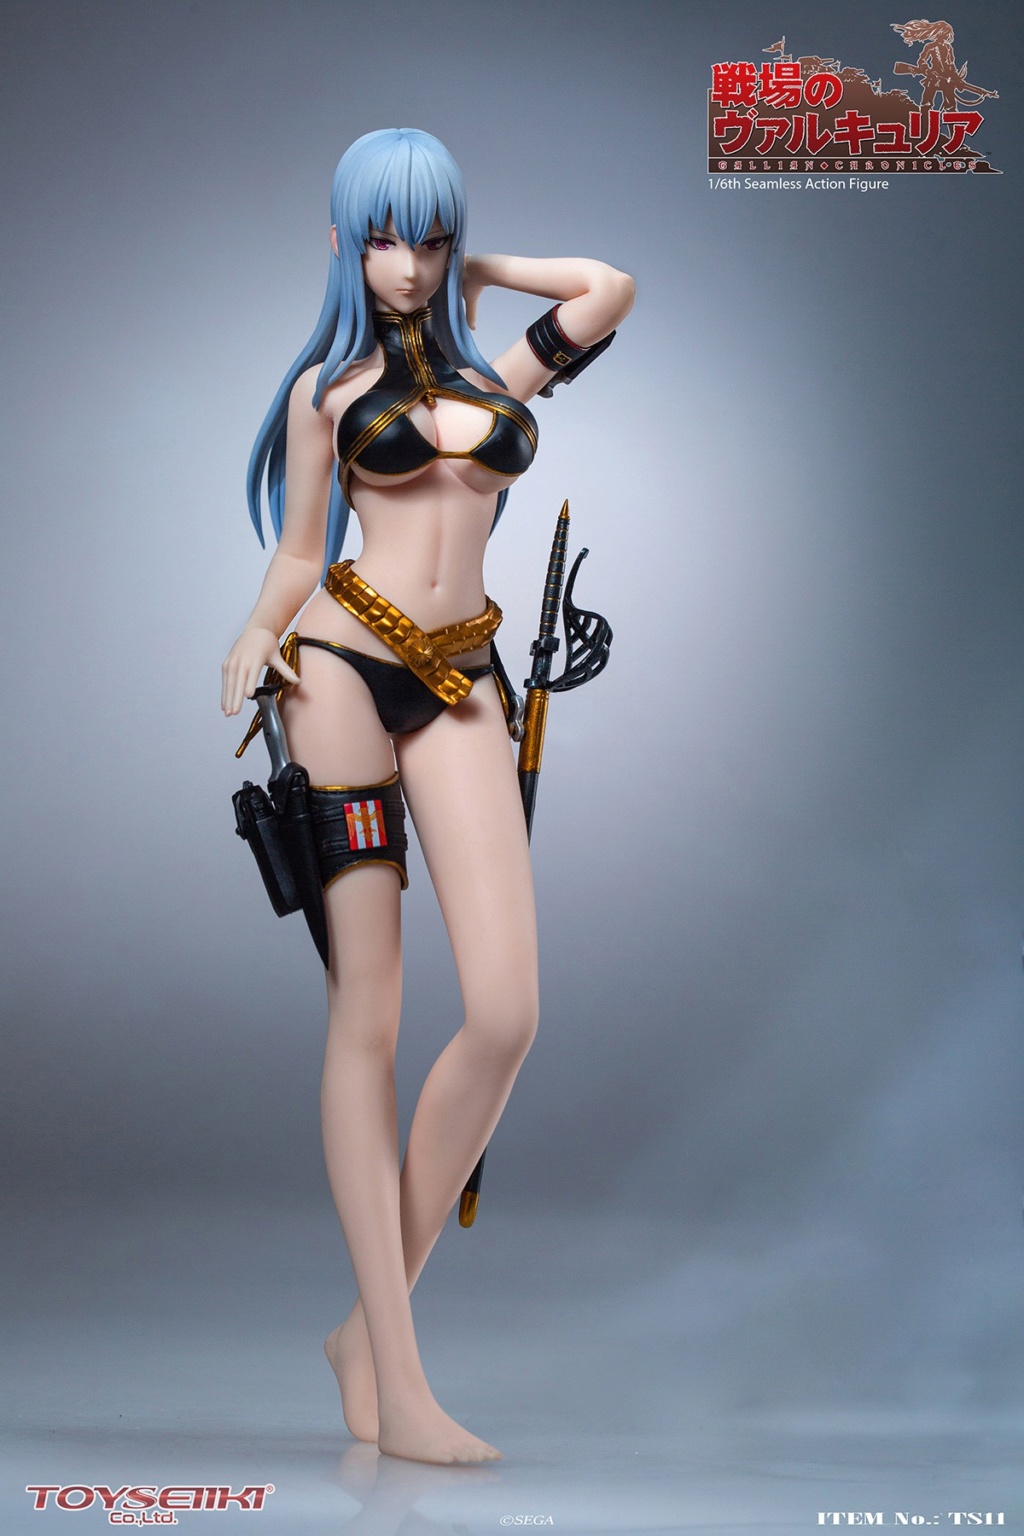 anime - NEW PRODUCT: TOYSEIIKI: 1/6 "The Valkyrie of the Battlefield"- Selvaria Bles Action Figure (# TS11) 12000410